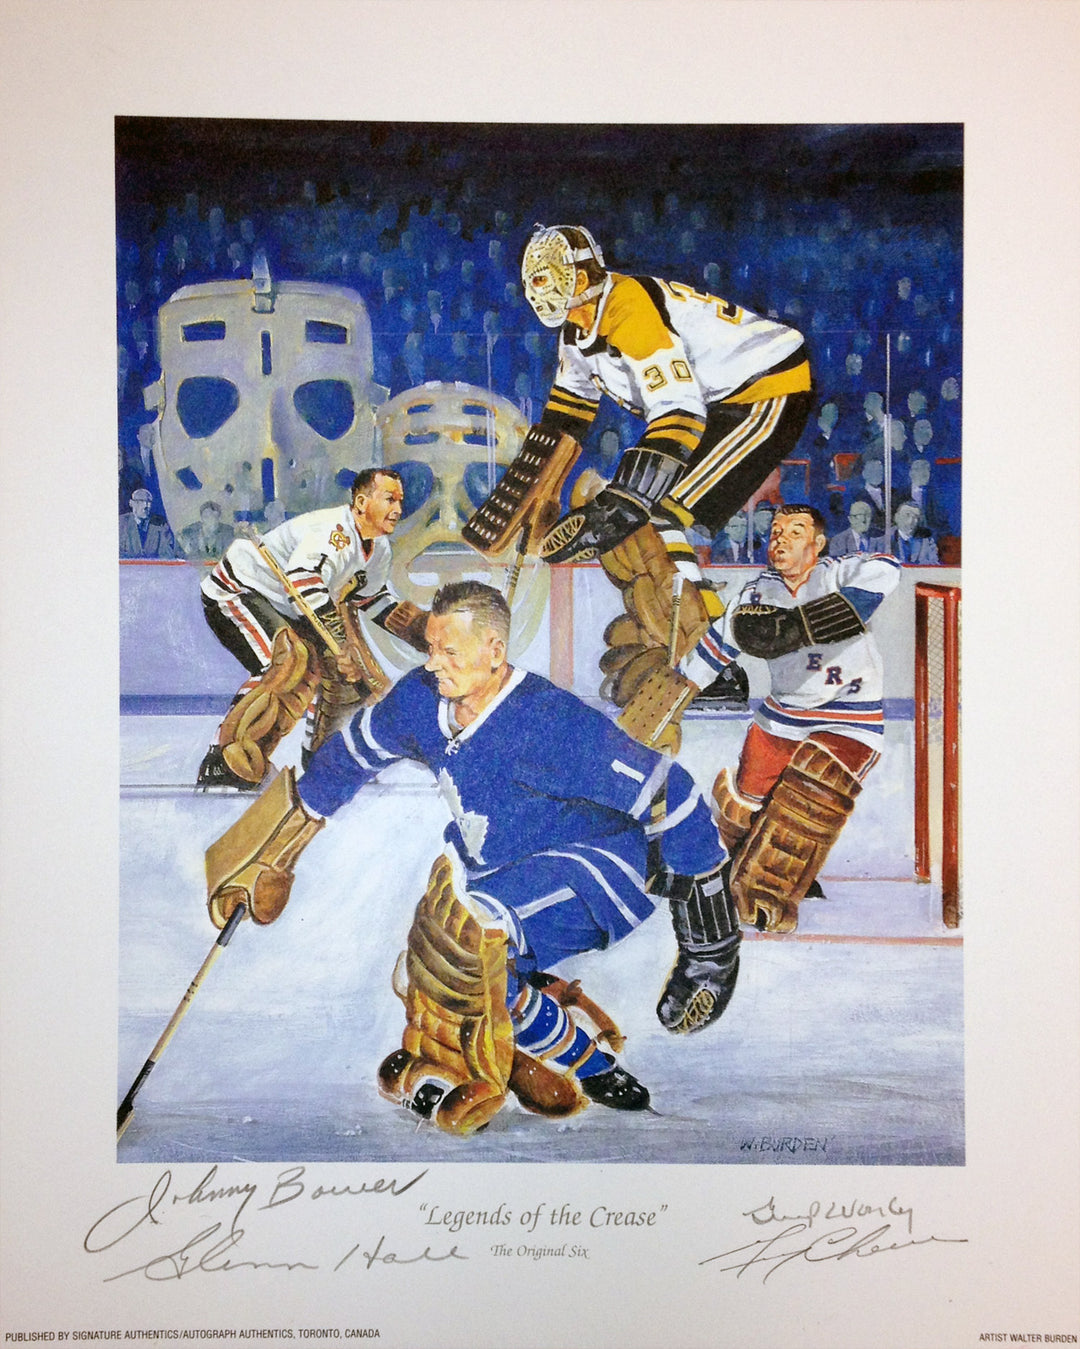 Legends Of The Crease Lithograph - 4 Autographs, Maple Leafs, NY Rangers, Blackhawks, Boston Bruins, NHL, Hockey, Autographed, Signed, AALCH30344